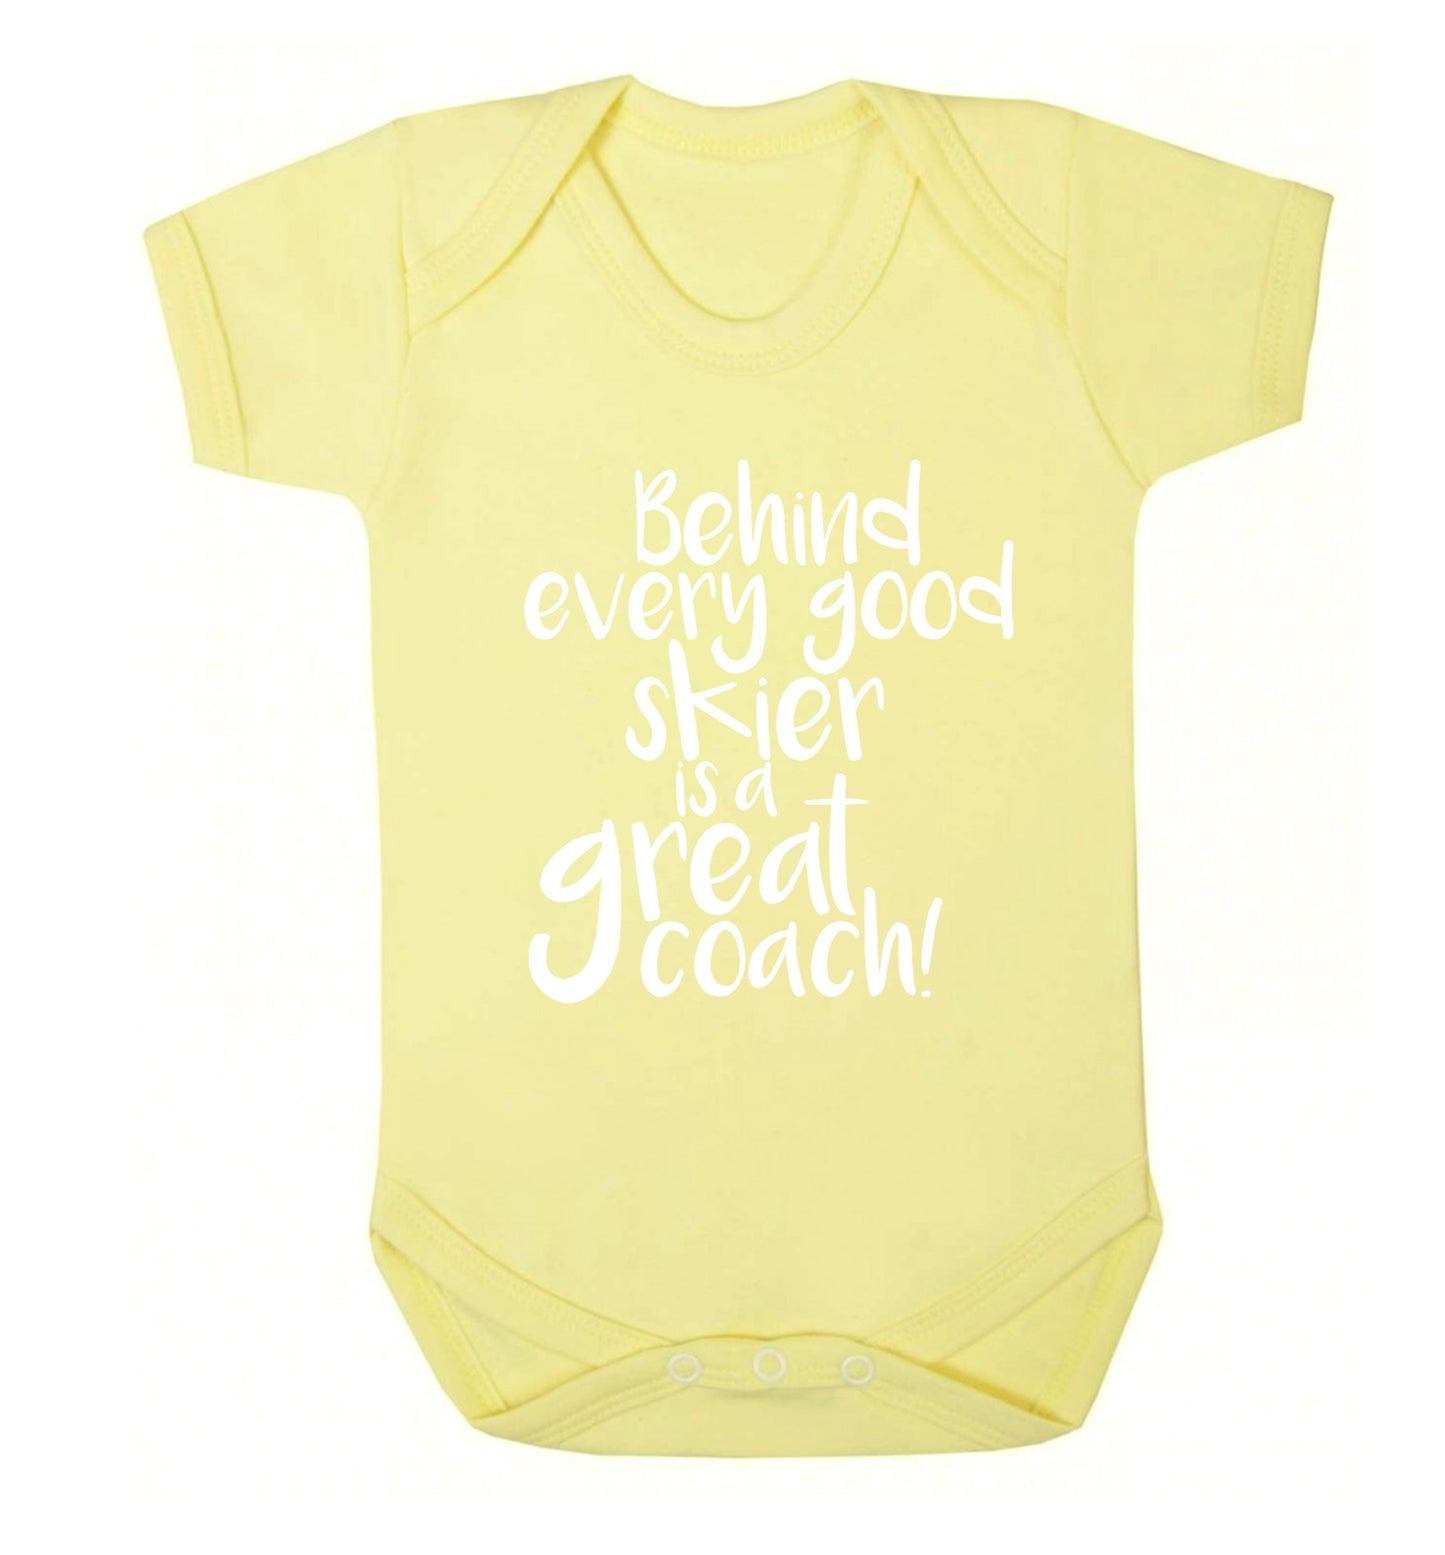 Behind every good skier is a great coach! Baby Vest pale yellow 18-24 months